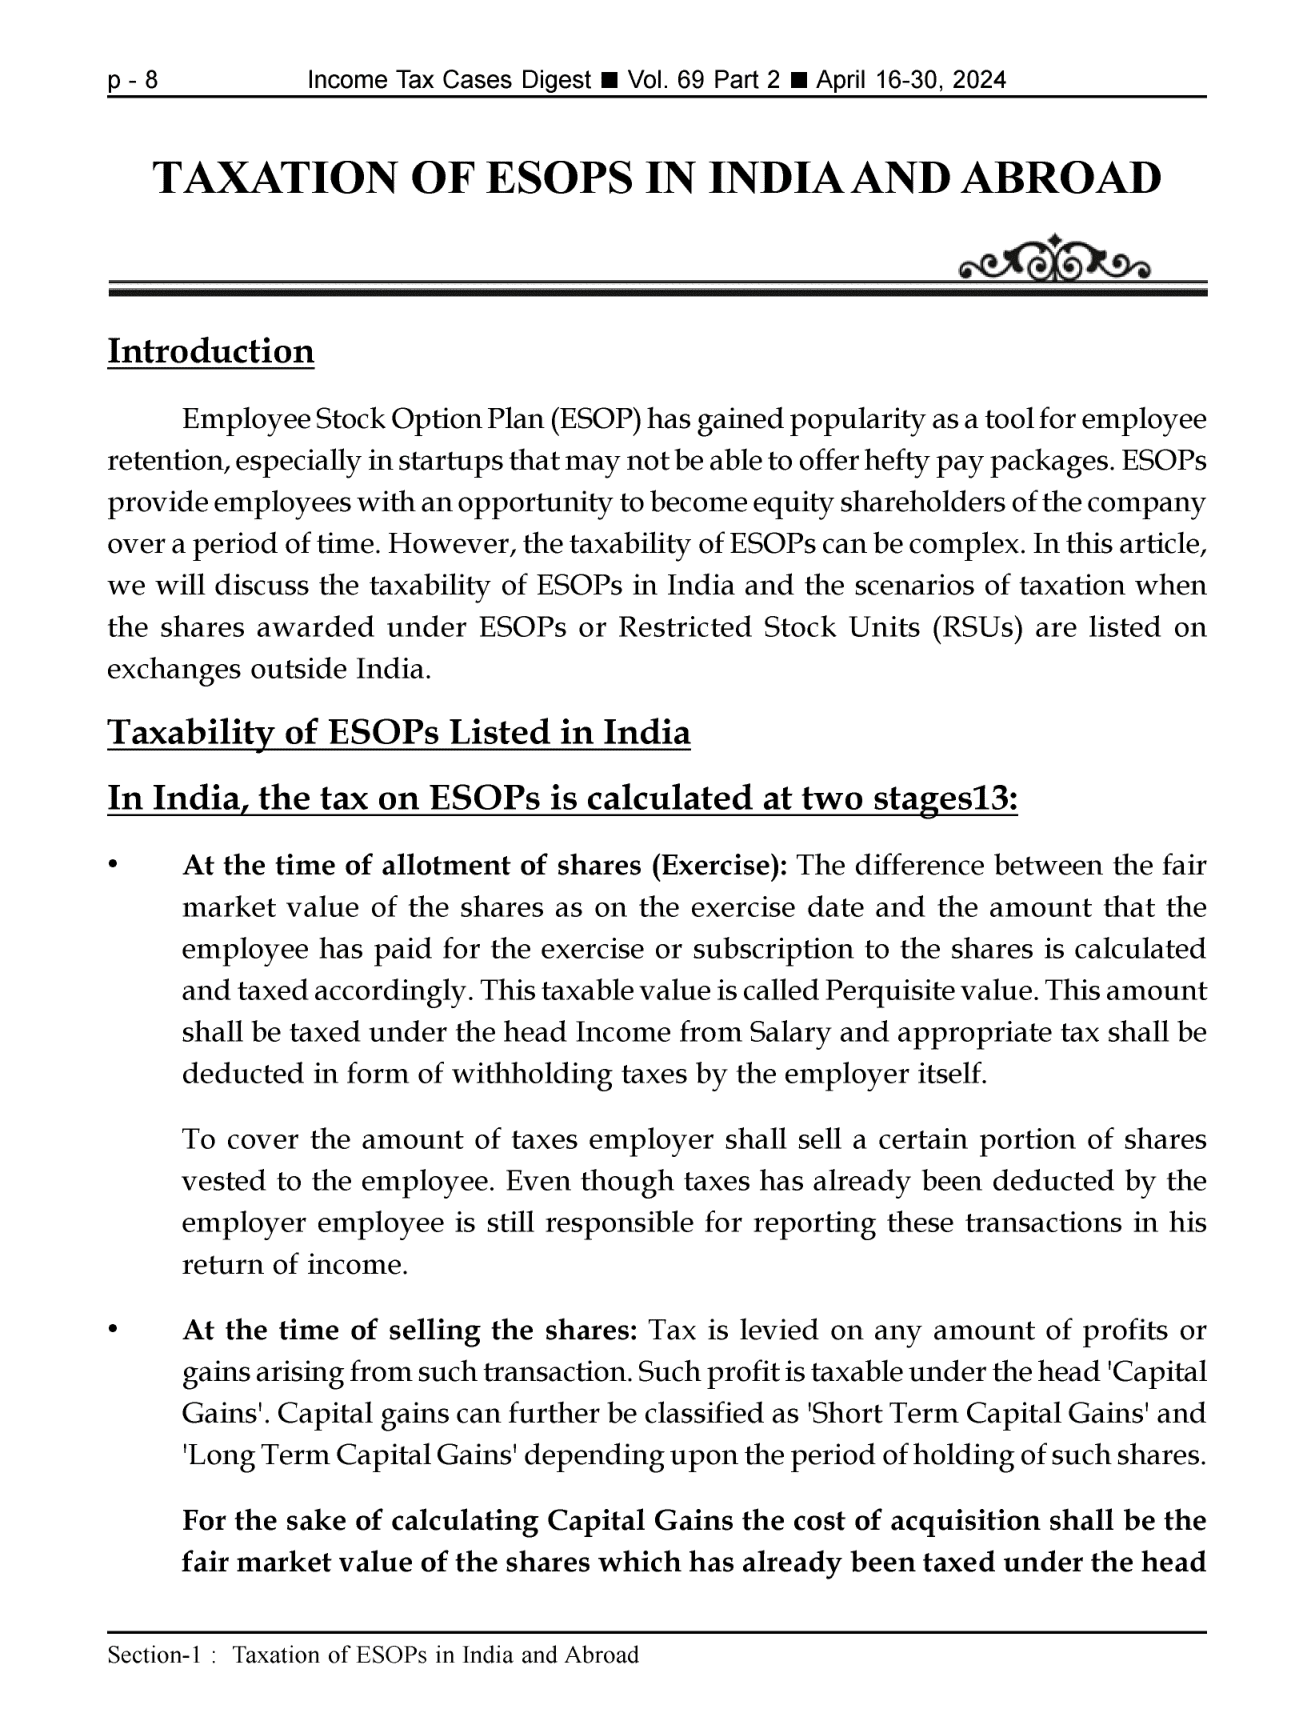 Income-Tax Cases Digest Magazine Page 6